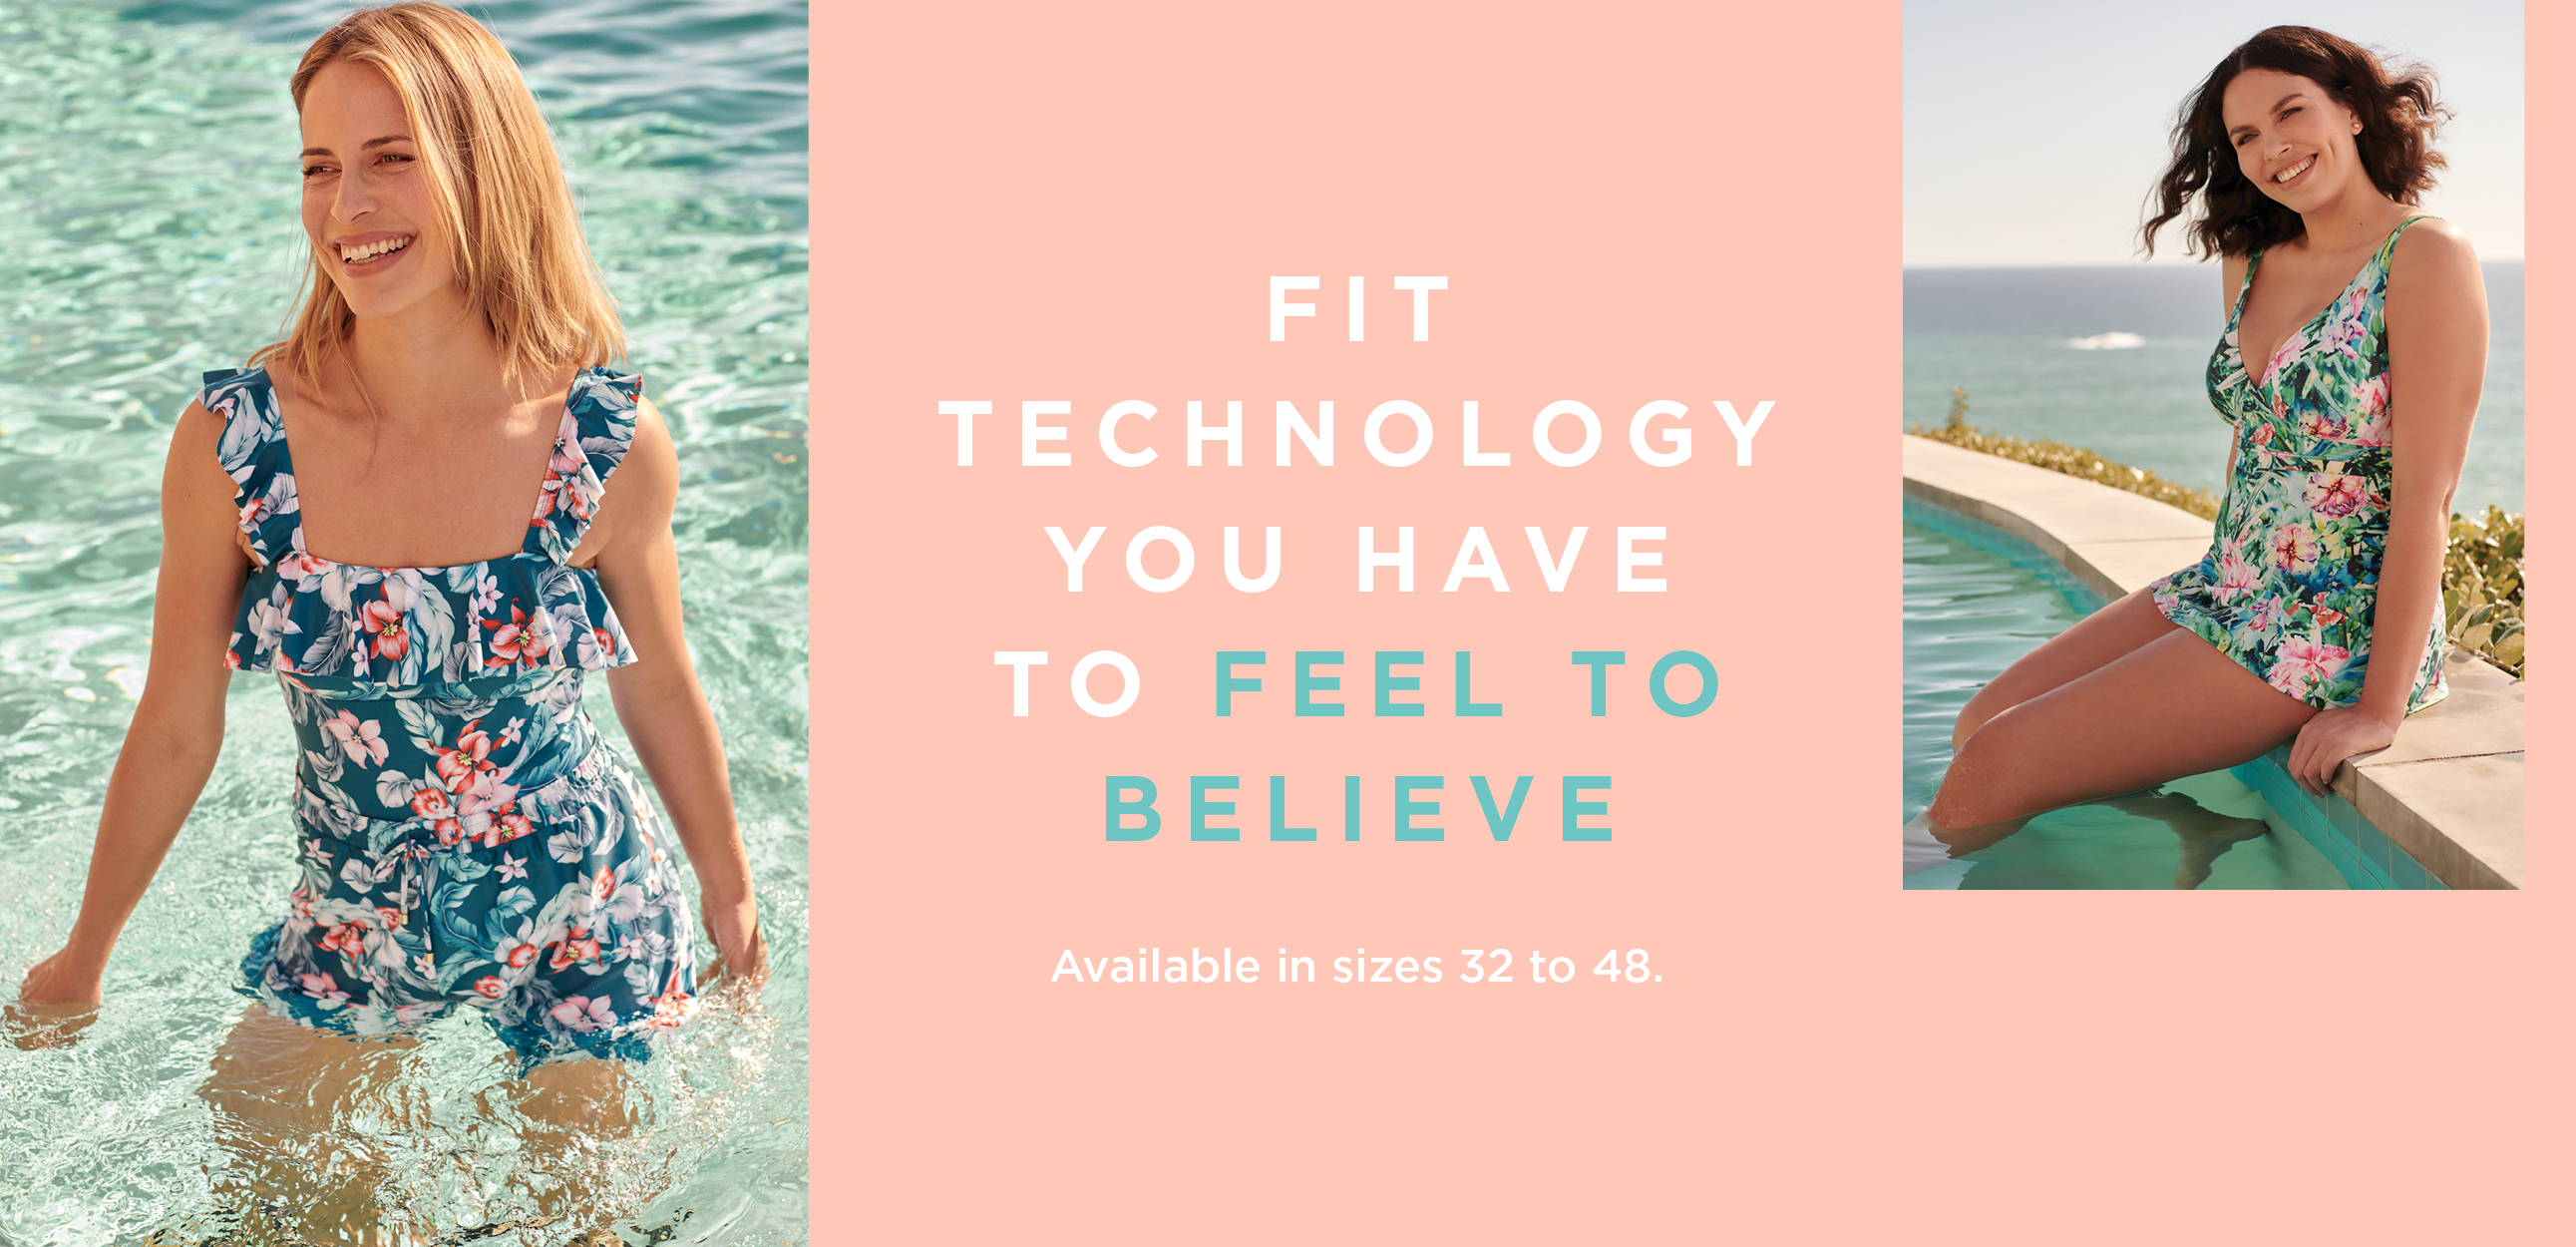 Miladys - When it's slimming technology you're after, think no further than  WonderFit. Find your favourites online at